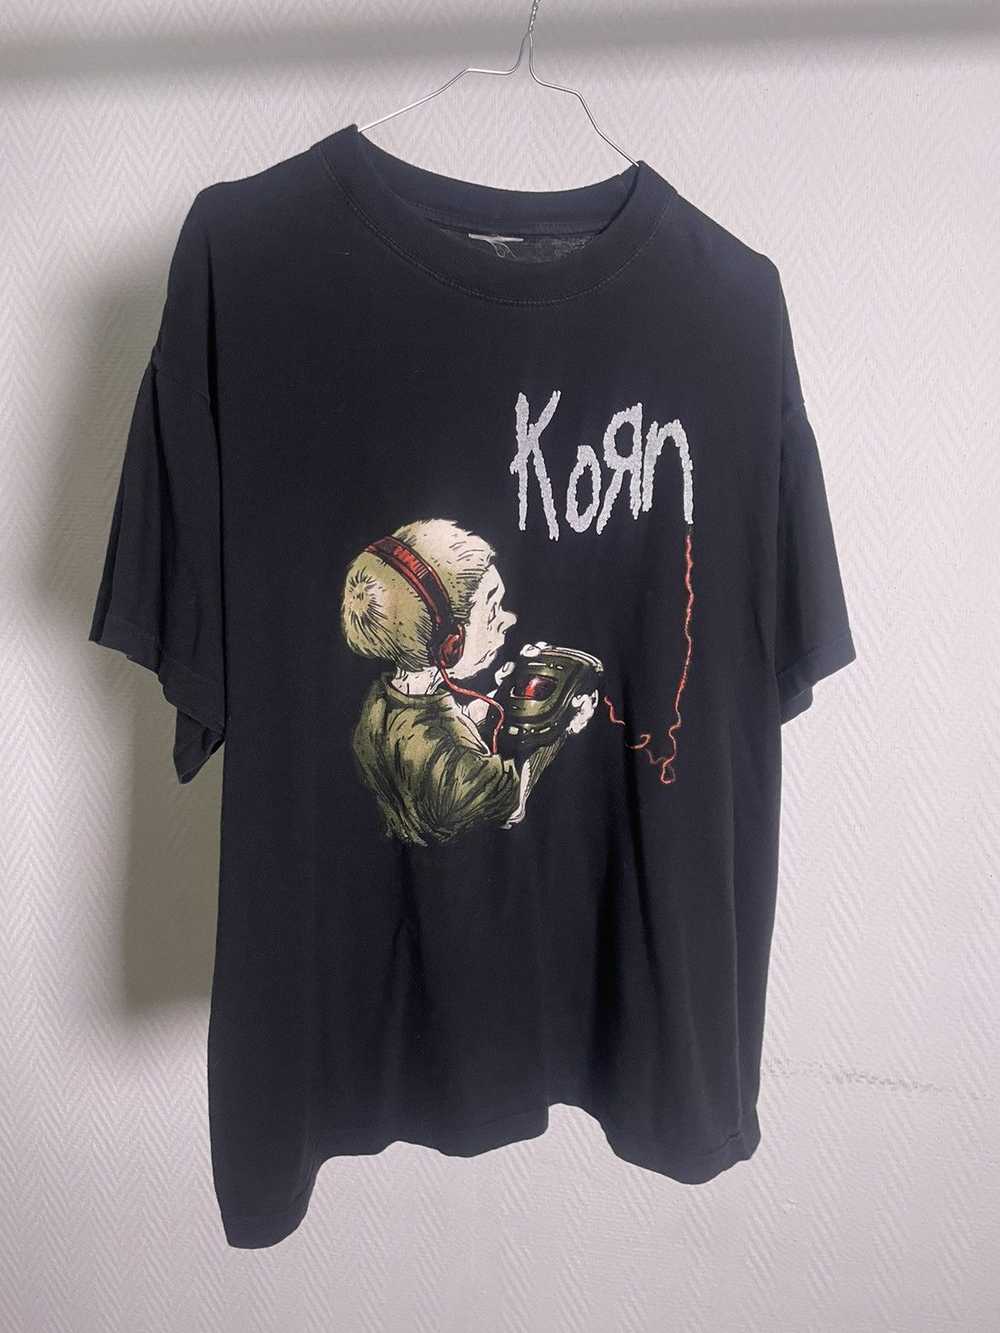 Band Tees × Vintage 90’s Korn Follow The Leader S… - image 1